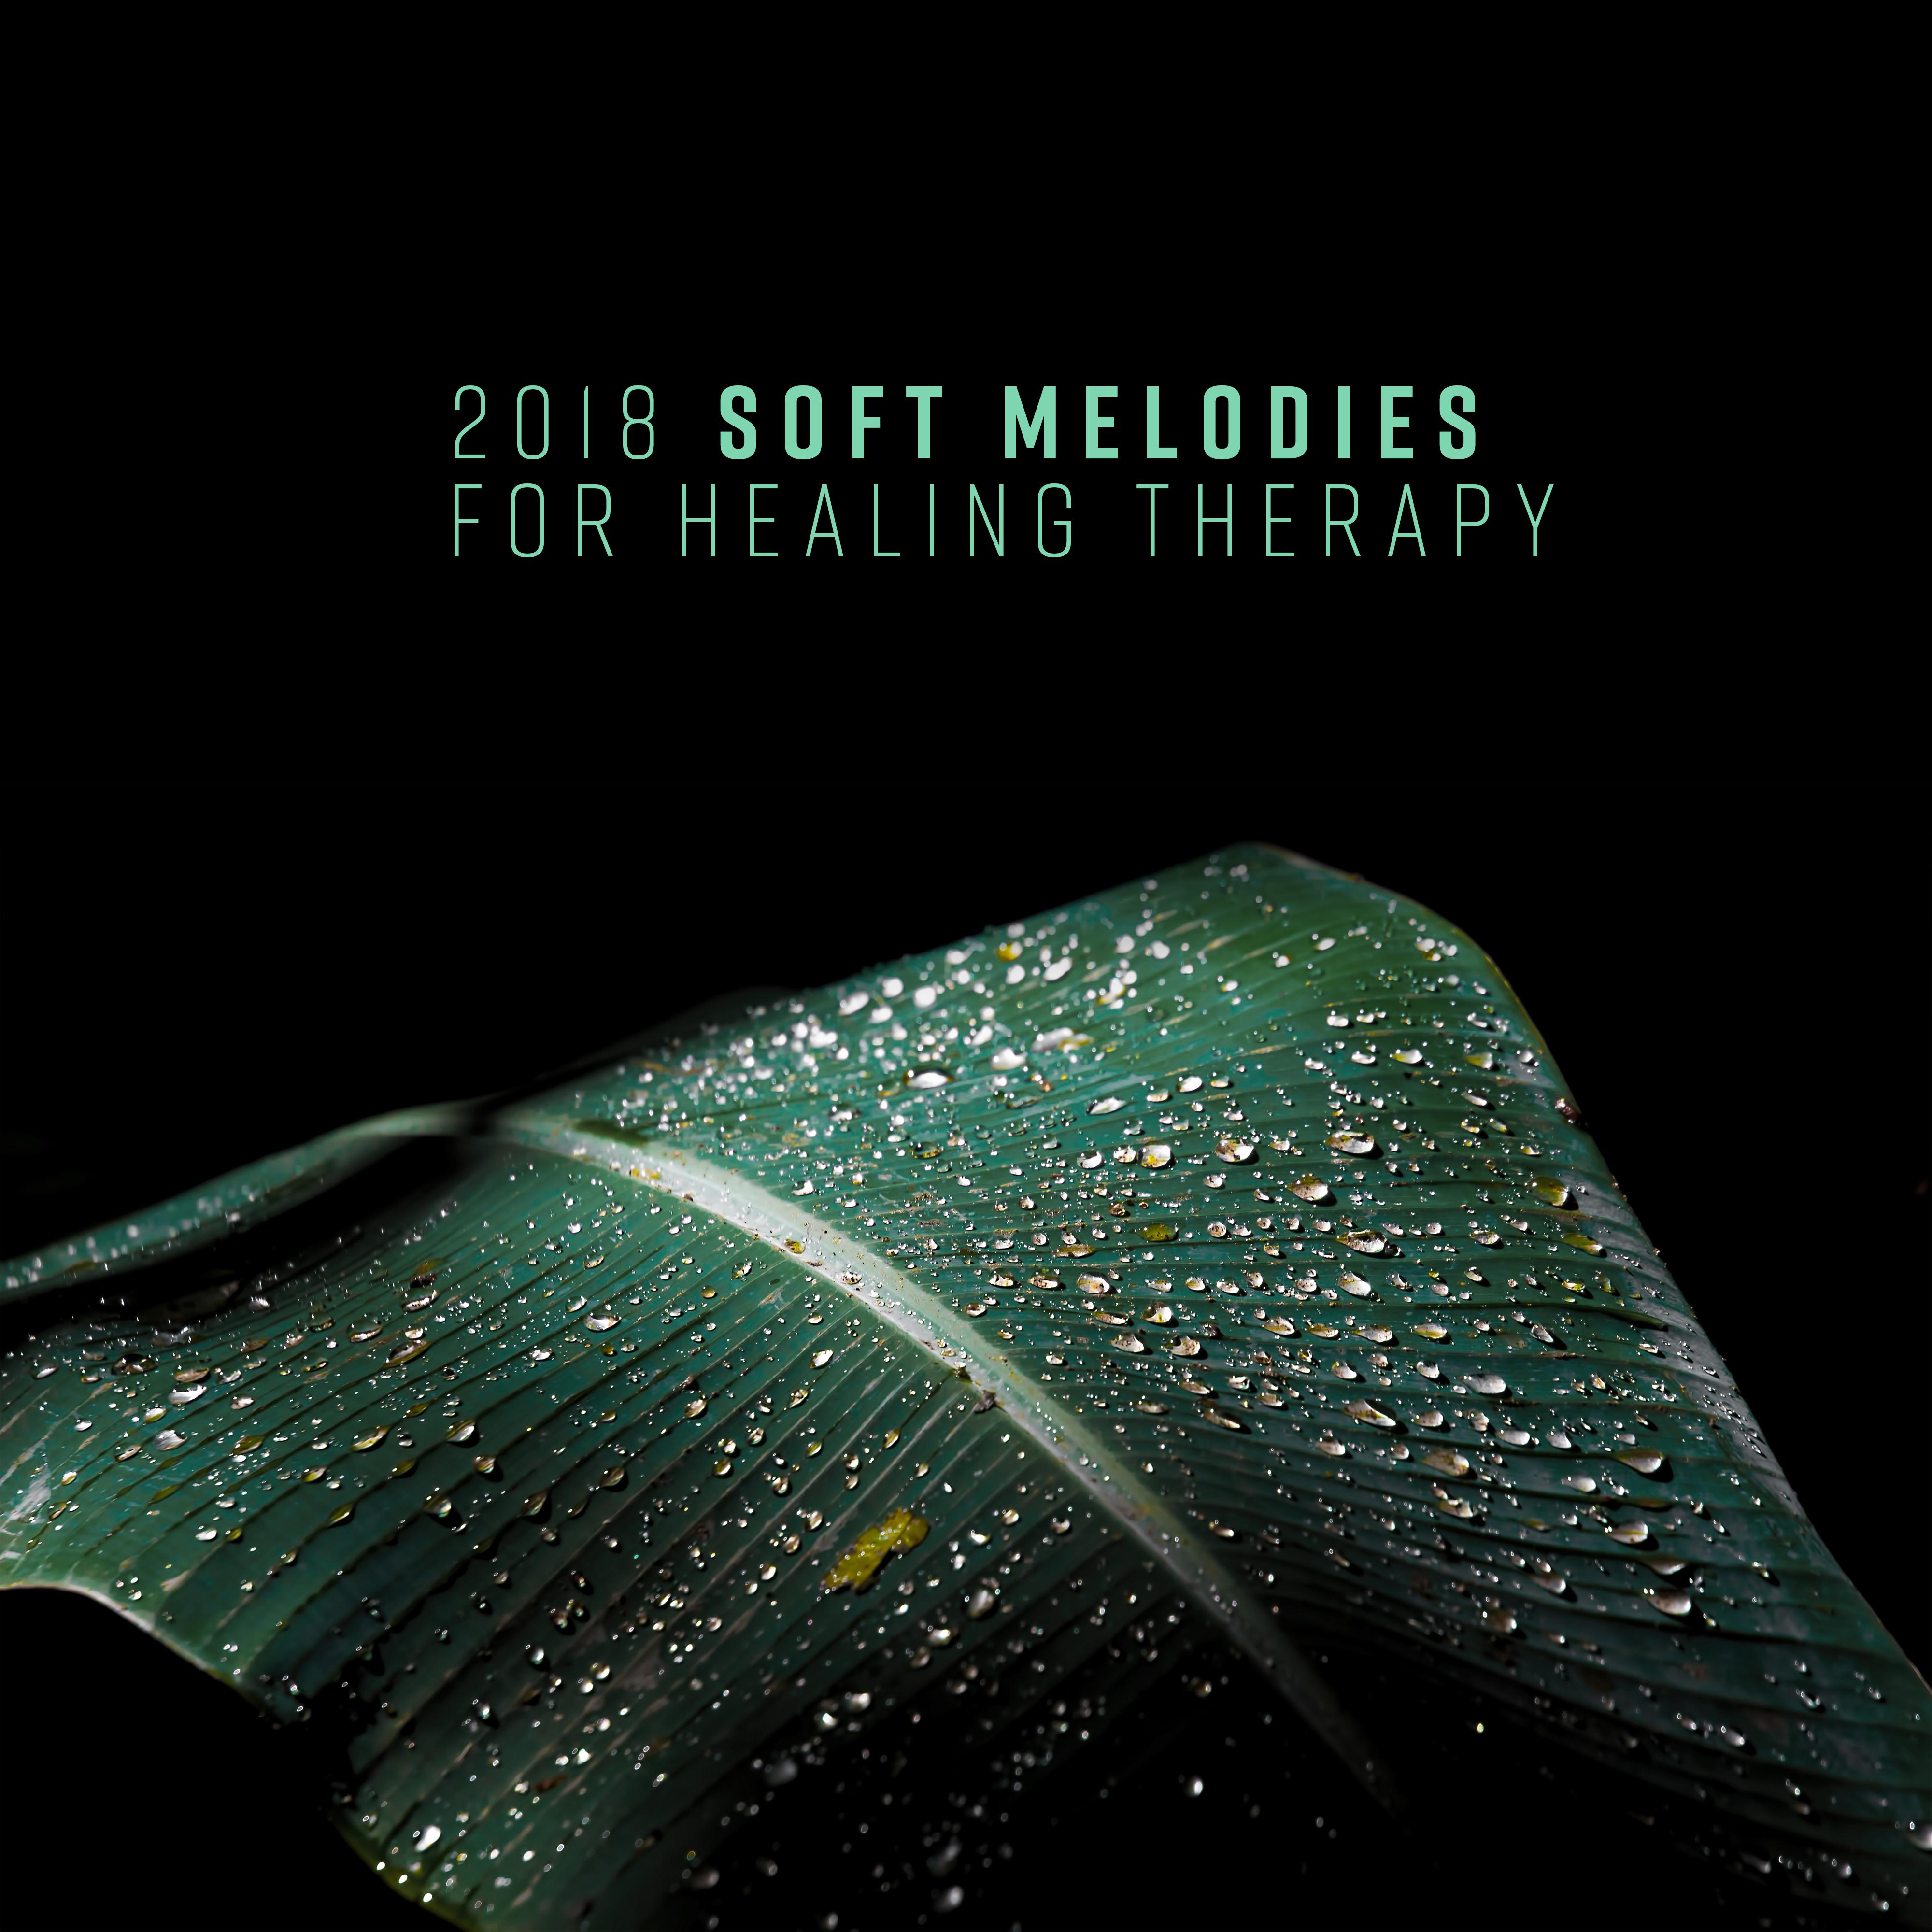 2018 Soft Melodies for Healing Therapy